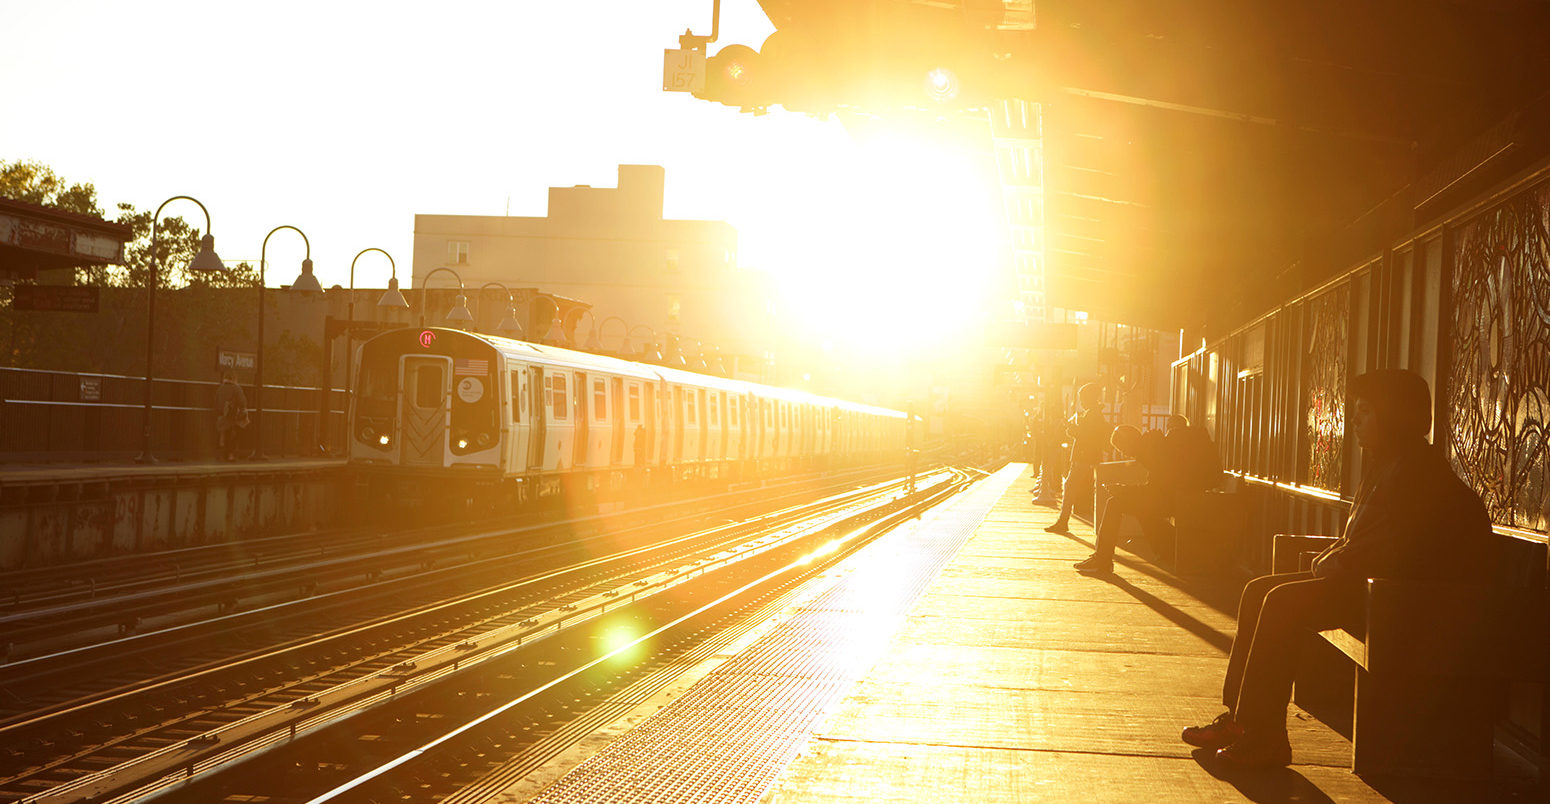 Sun shines on a subway station in Brooklyn, New York. Credit: Andrew Cribb / Alamy Stock Photo. H6FCM3